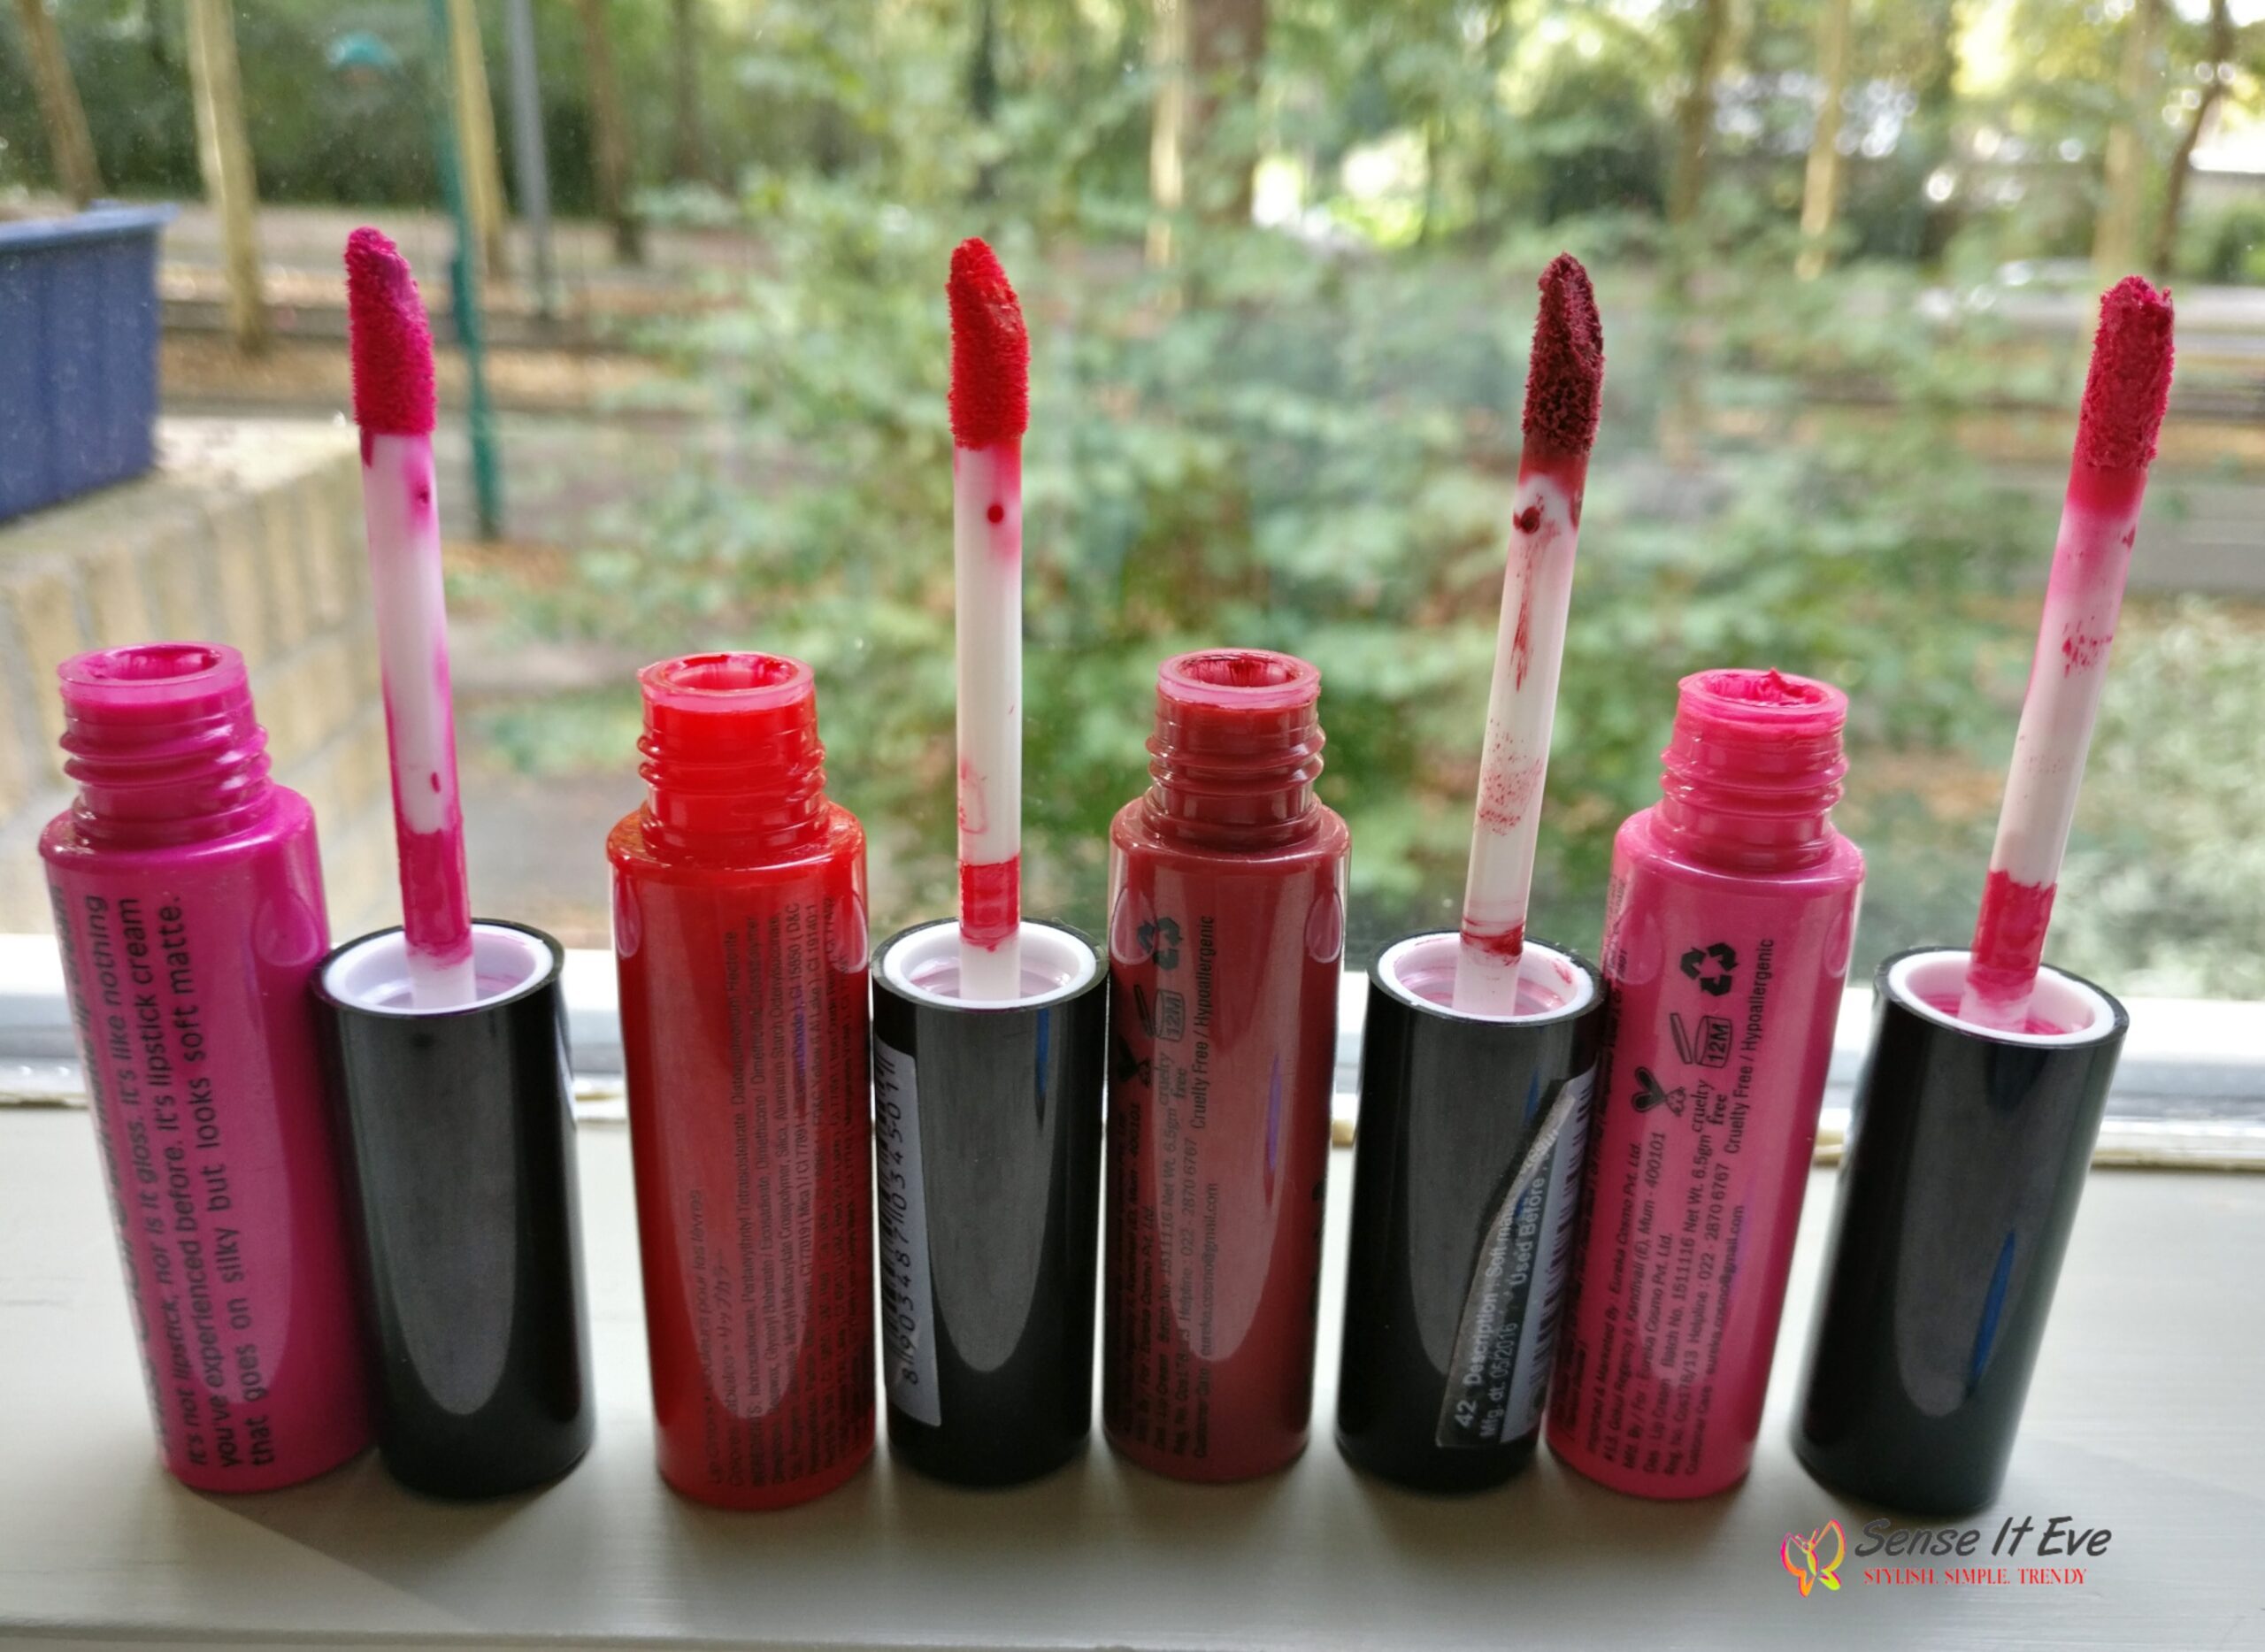 Miss Claire Soft Matte Lip Cream Packaging scaled Sense It Eve Miss Claire Soft Matte Lip Cream : Review & Swatches